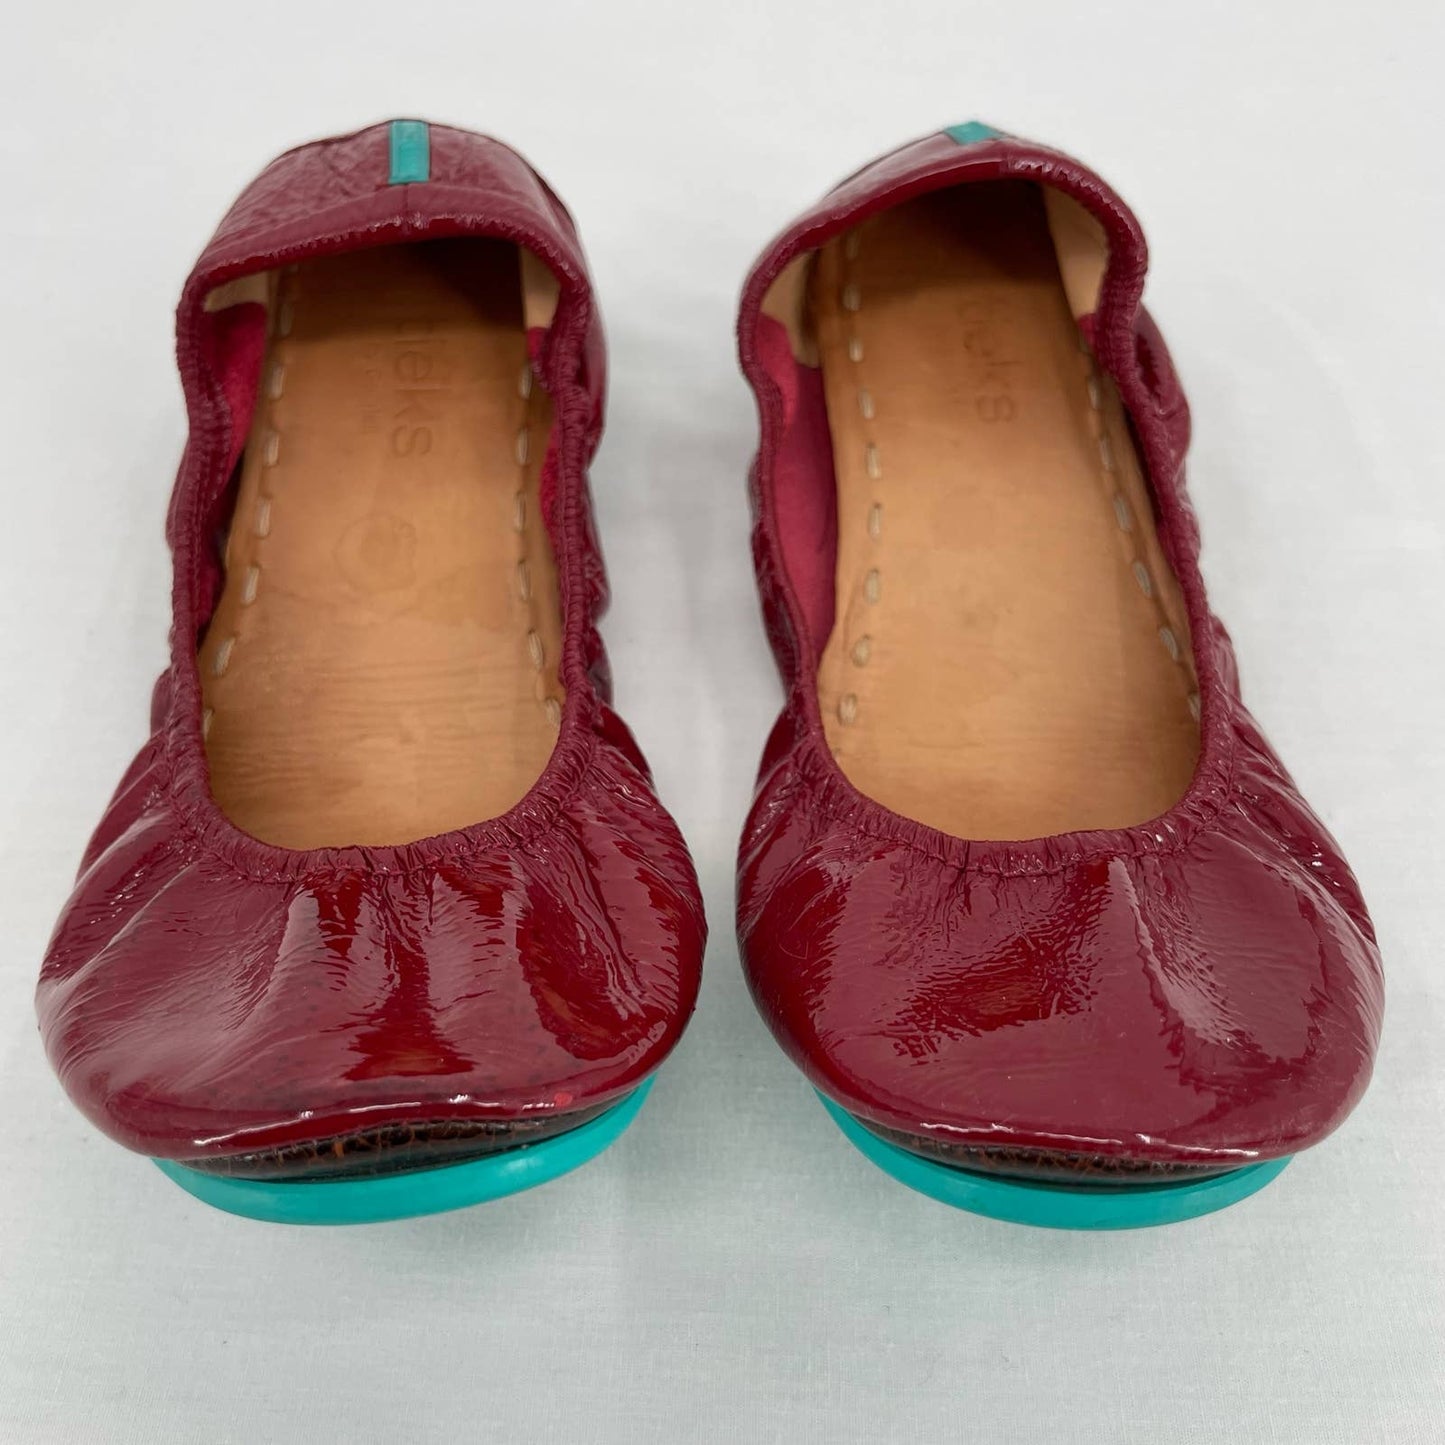 Tieks Ruby Red Patent Leather Ballet Flats Classic Foldable Travel Shoes Size 9